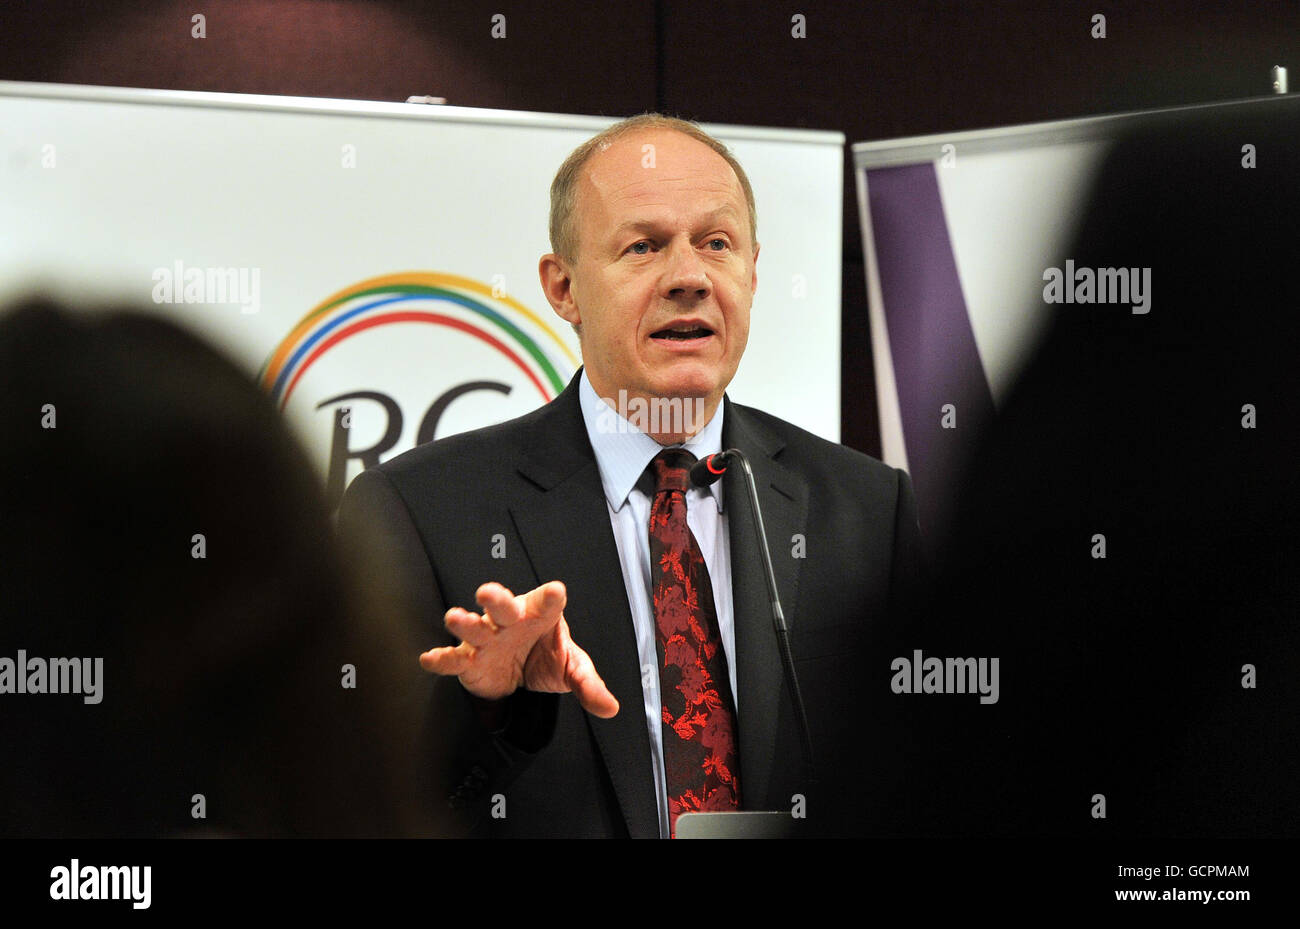 Immigration minister Damian Green addresses members of the Royal Commonwealth Society on the subject of immigration, at the Society's central London building. Stock Photo